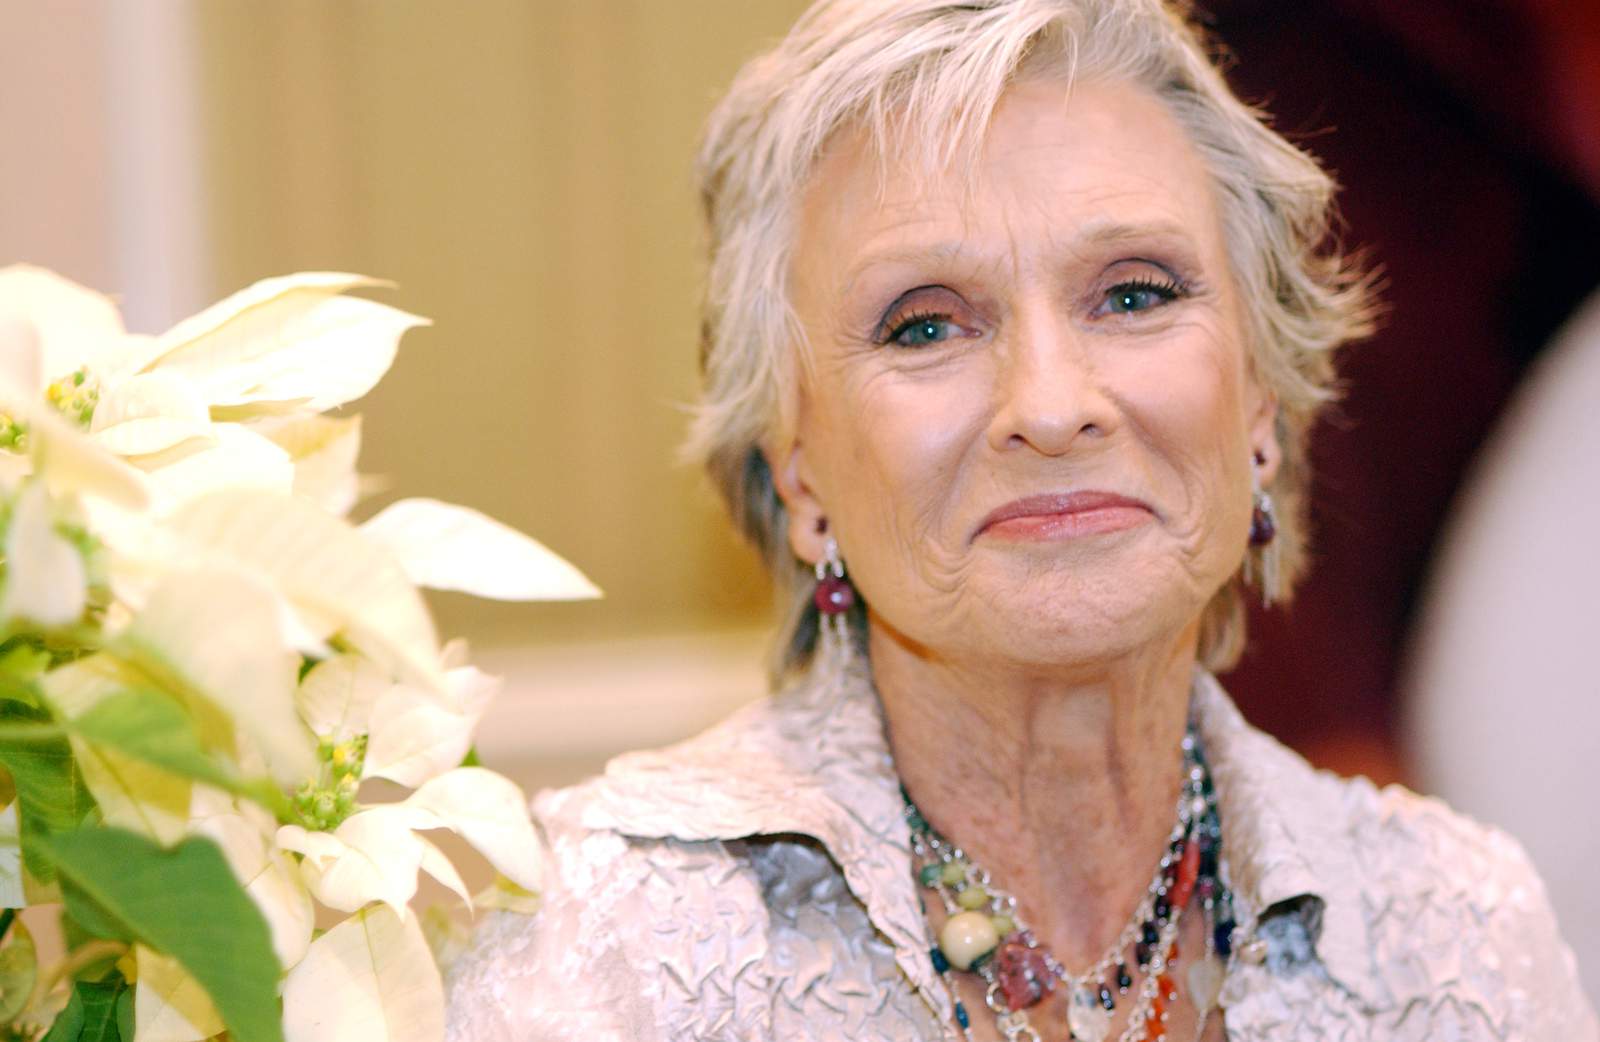 Cloris Leachman, Oscar-winning actor also known as TV’s Phyllis Lindstrom, dies at 94, publicist says